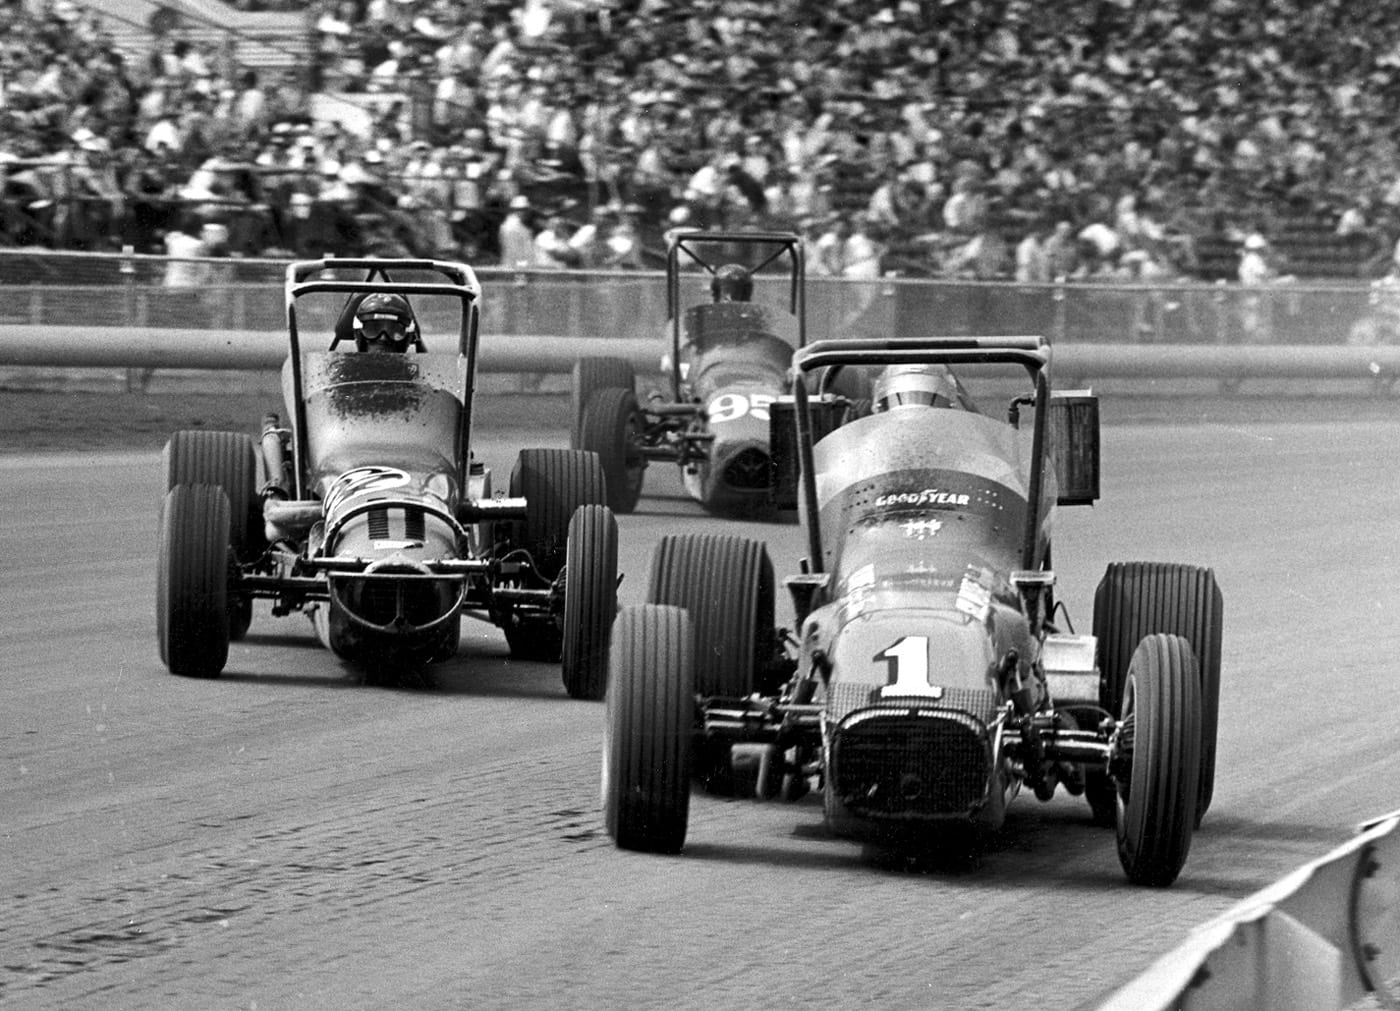 A.J. Foyt (1) shows the way during a championship car field at the DuQuoin (Ill.) State Fairgrounds in 1973.